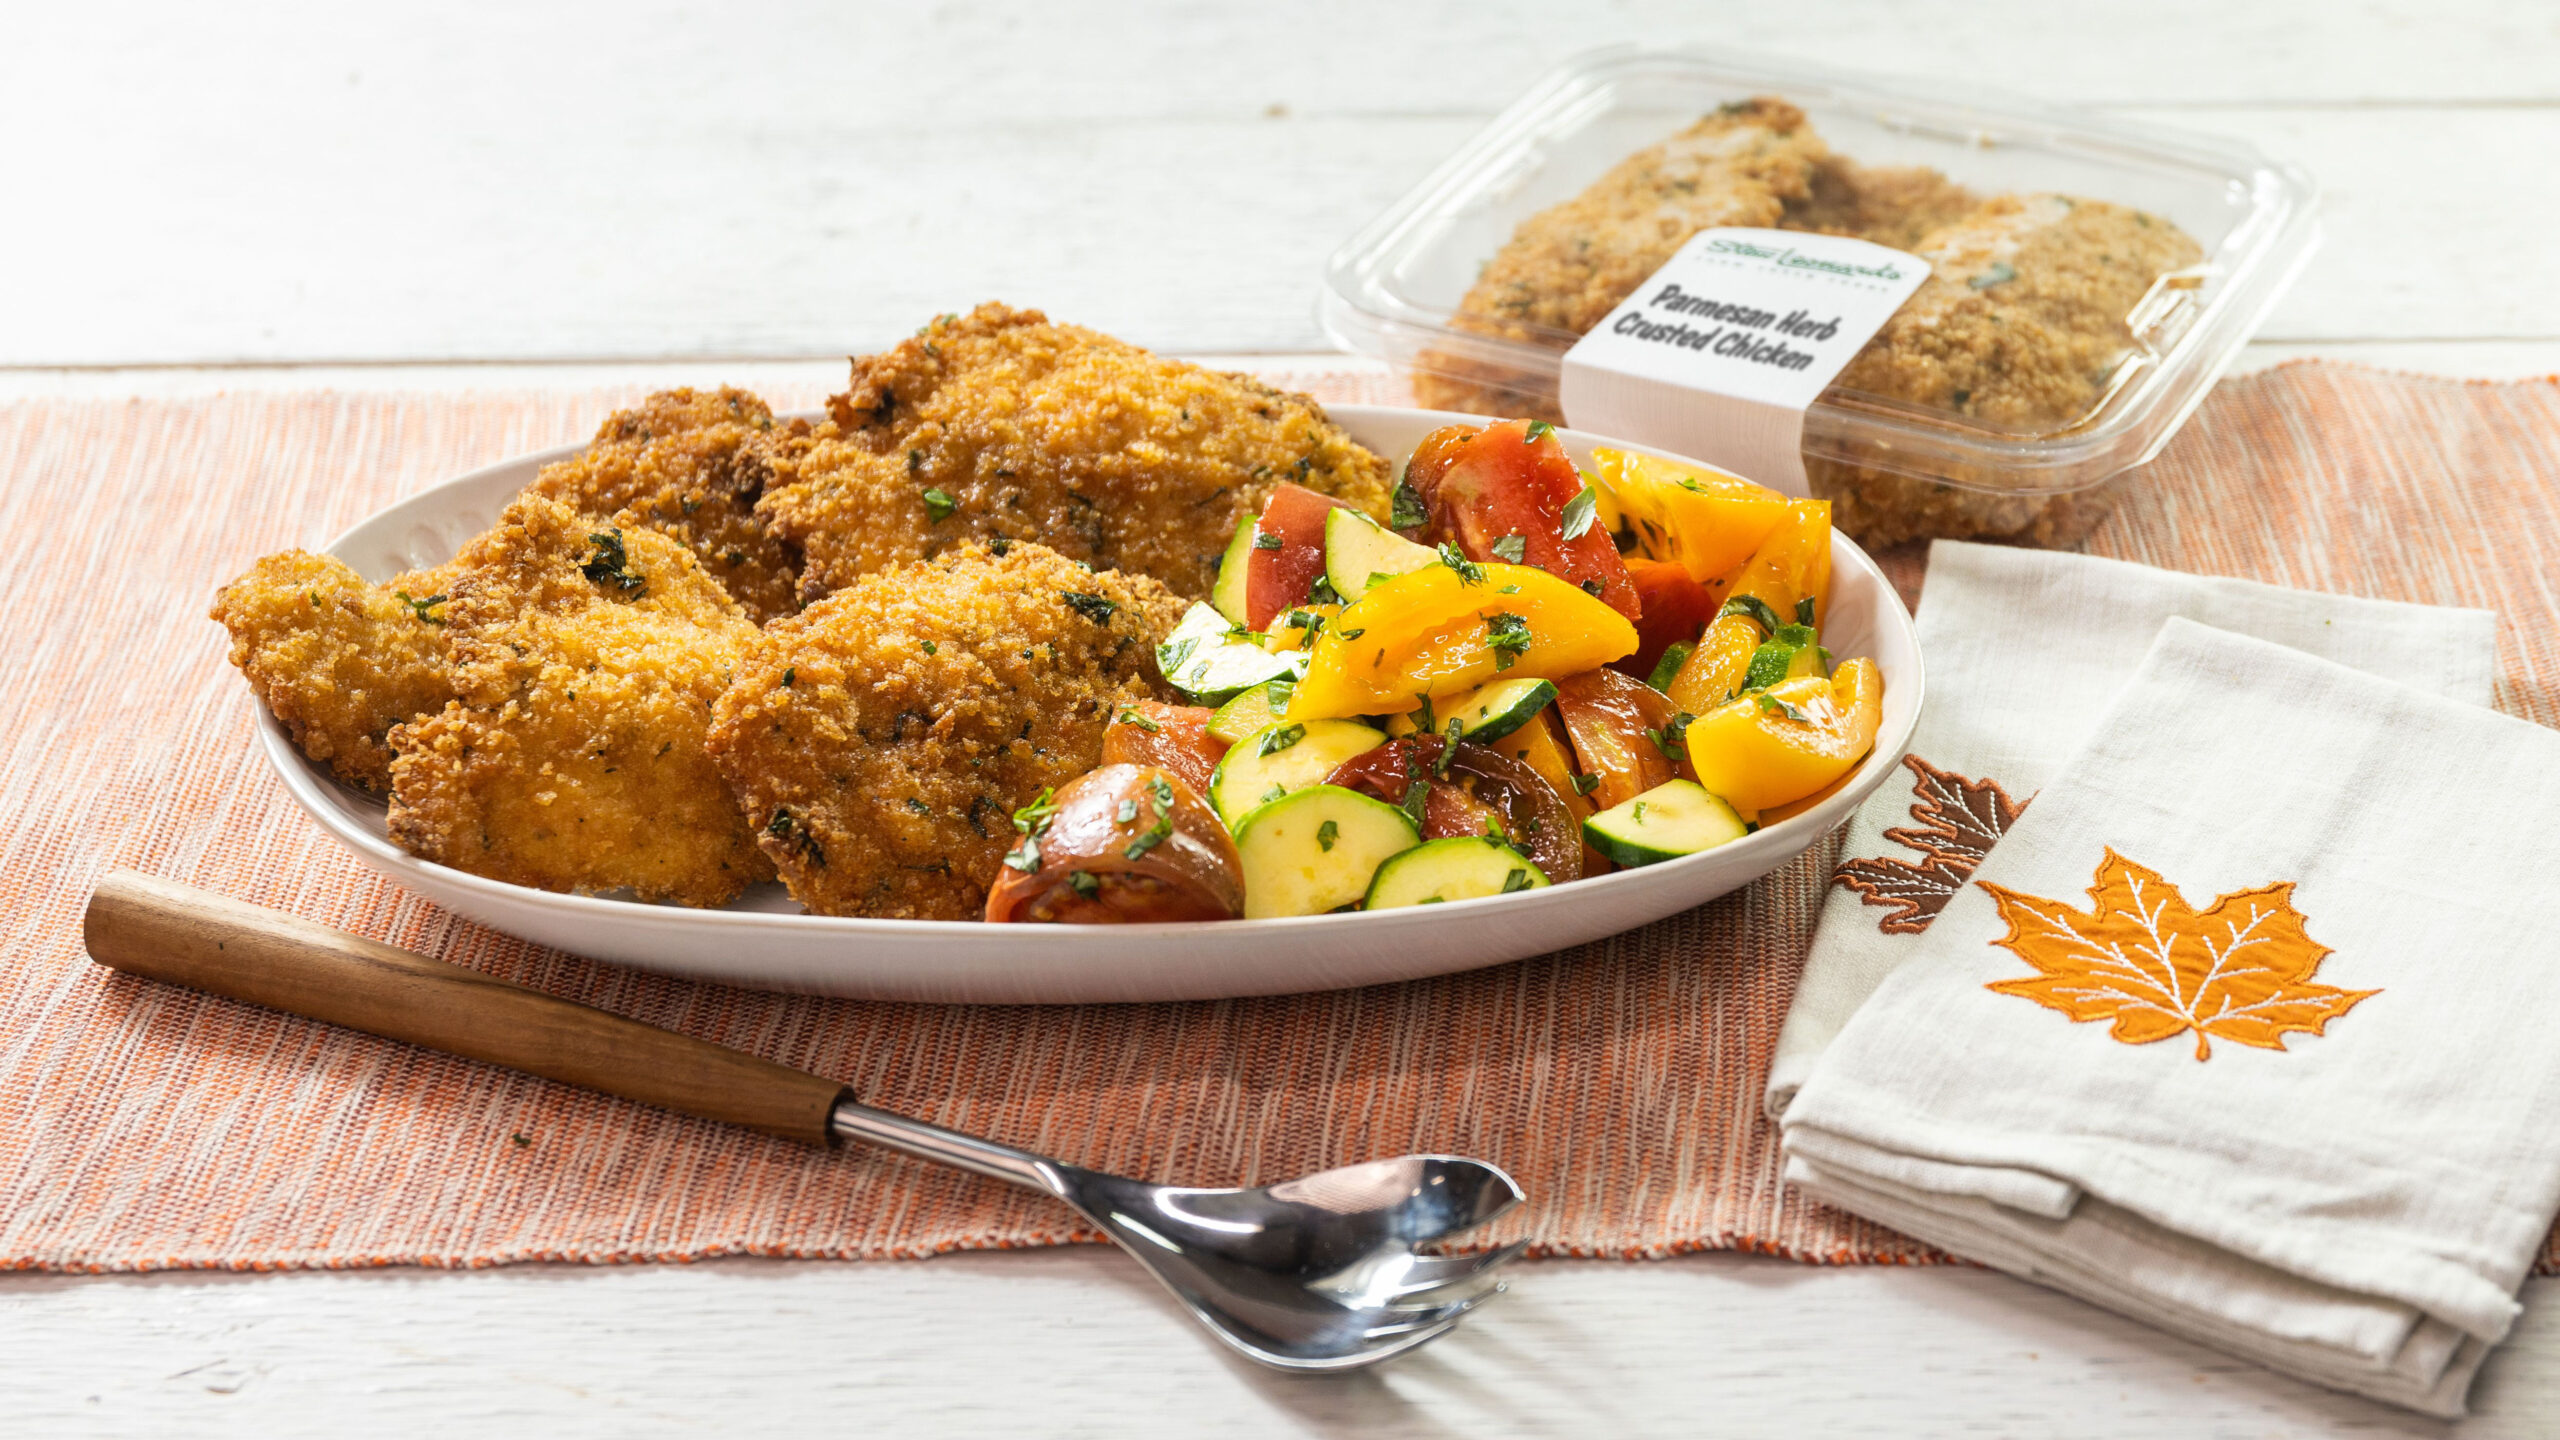 Parmesan-Herb Crusted Chicken with Squash and Heirloom Tomato Salad